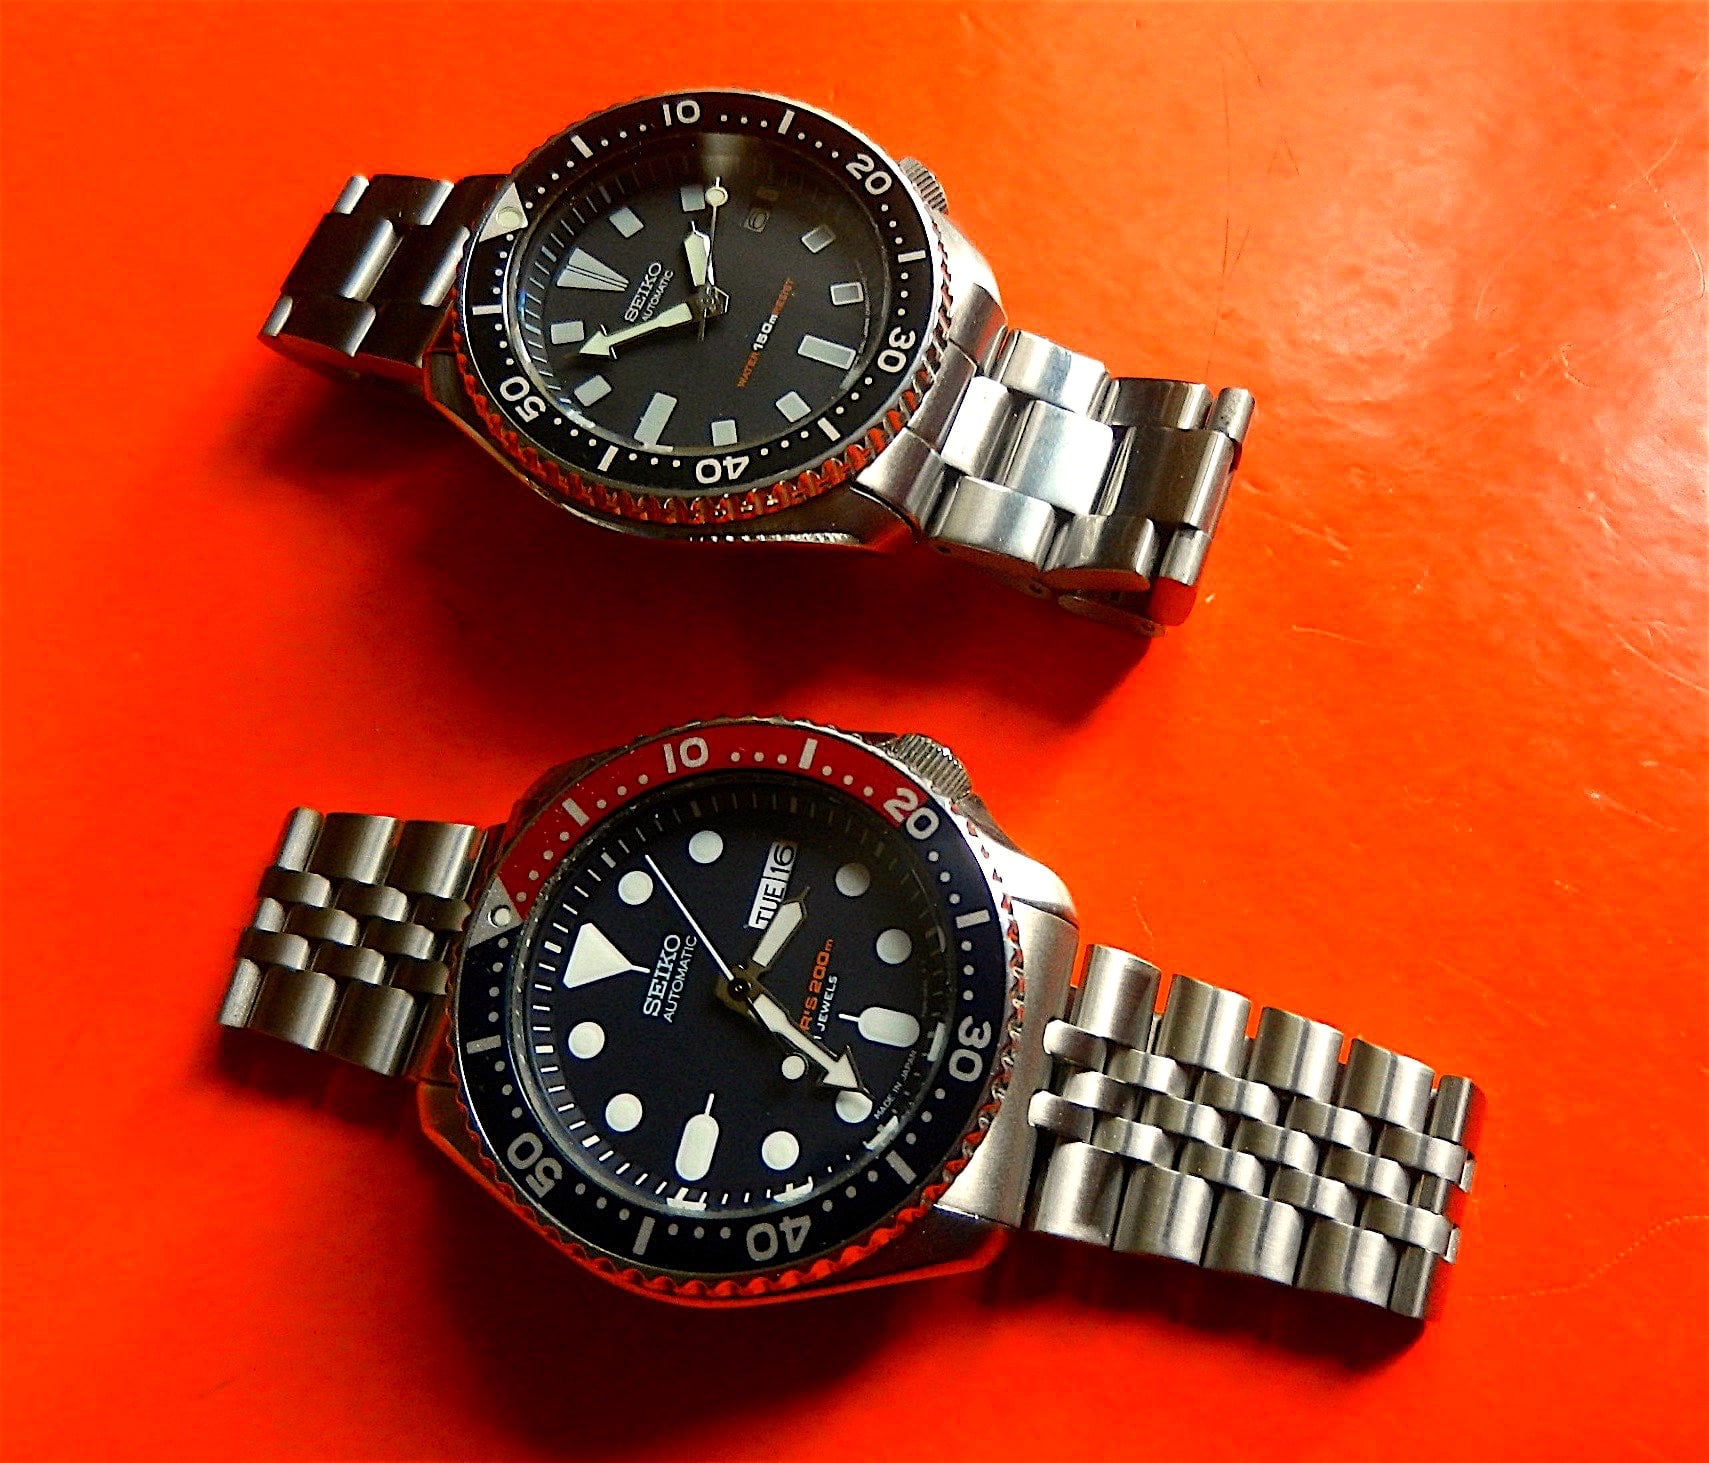 The 7002 case is like which SKX? | The Watch Site